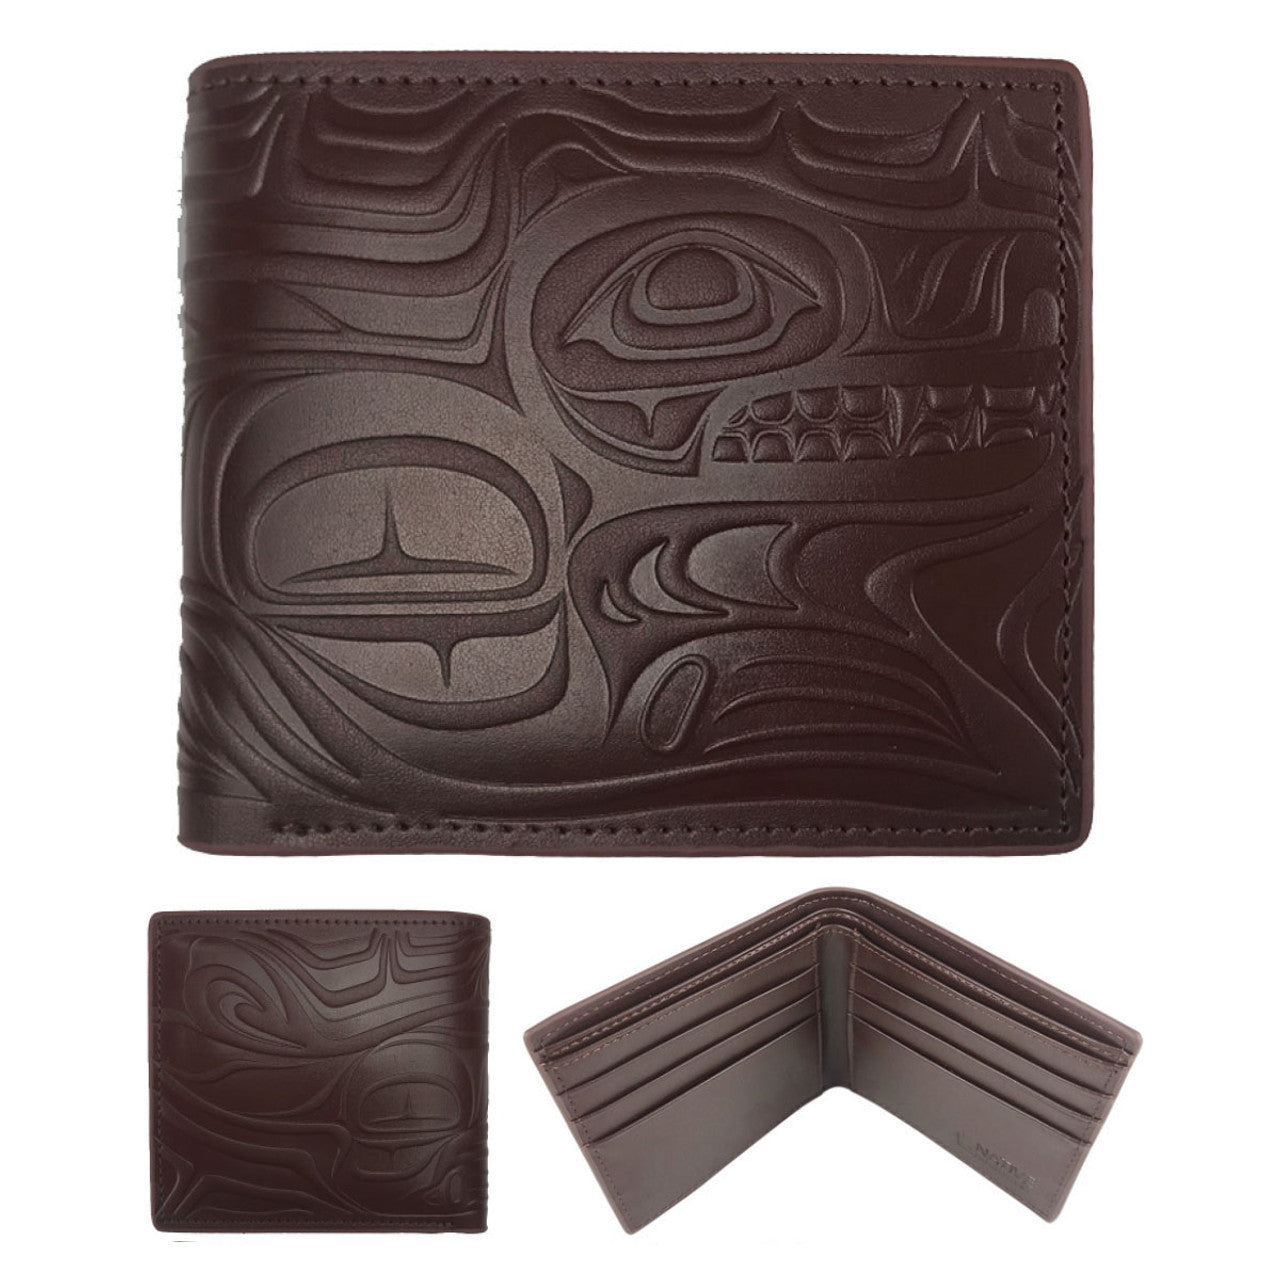 Wallet - Leather Embossed